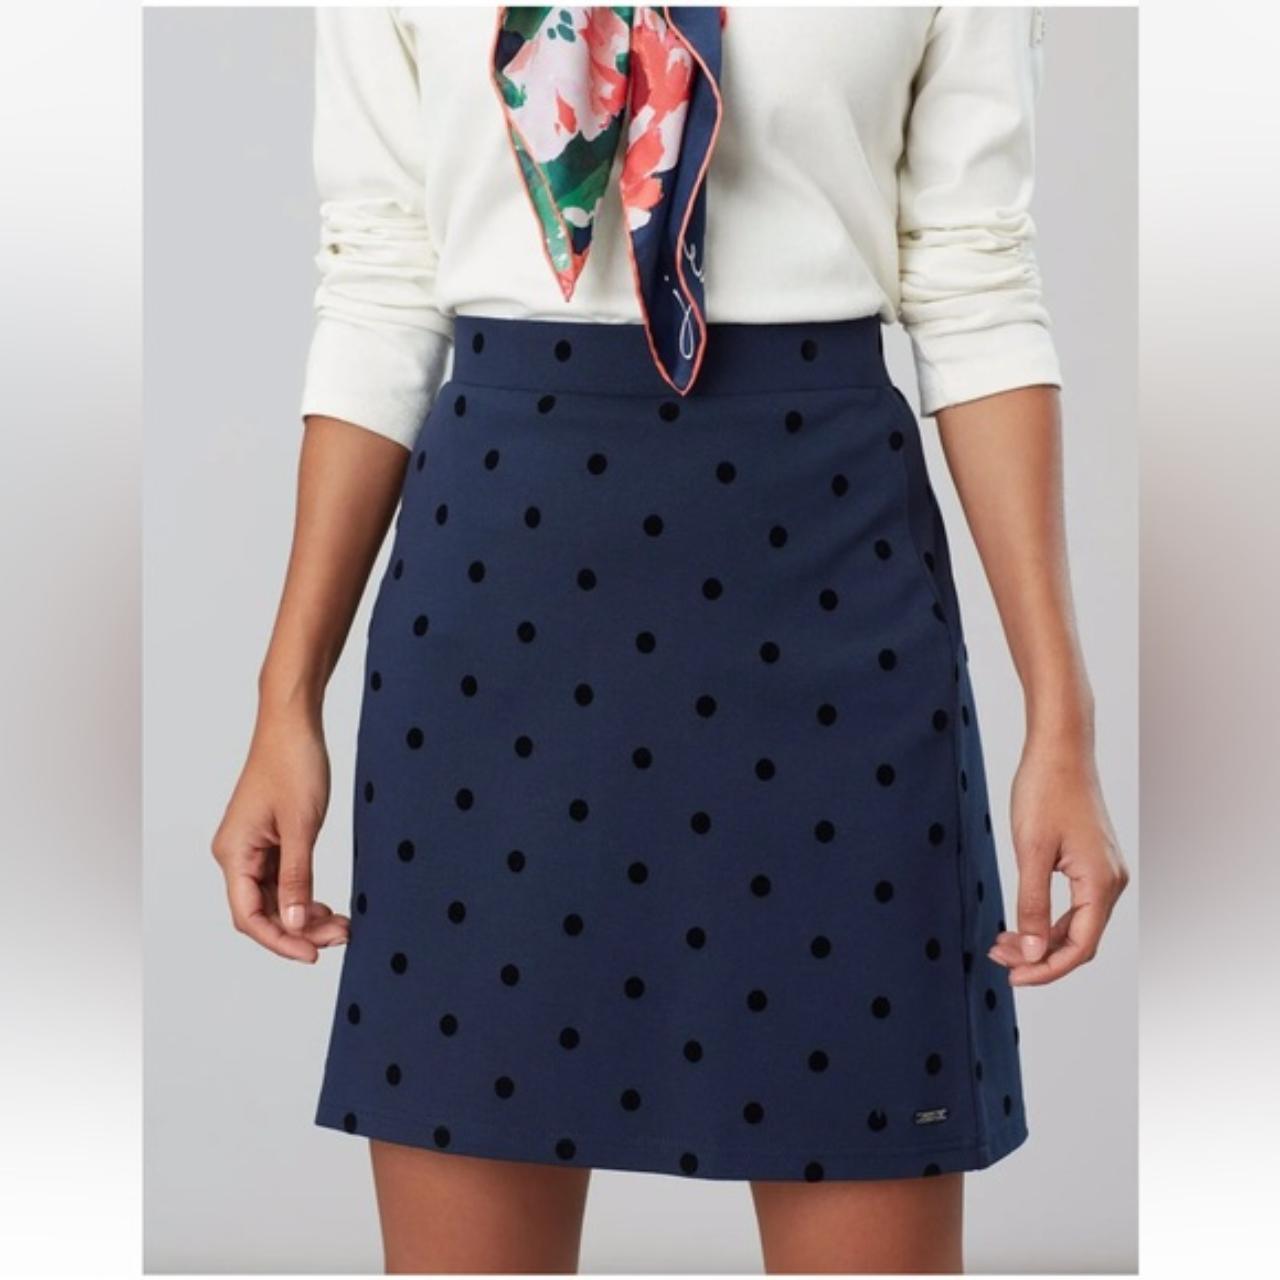 Joules Women's Black and Blue Skirt (2)